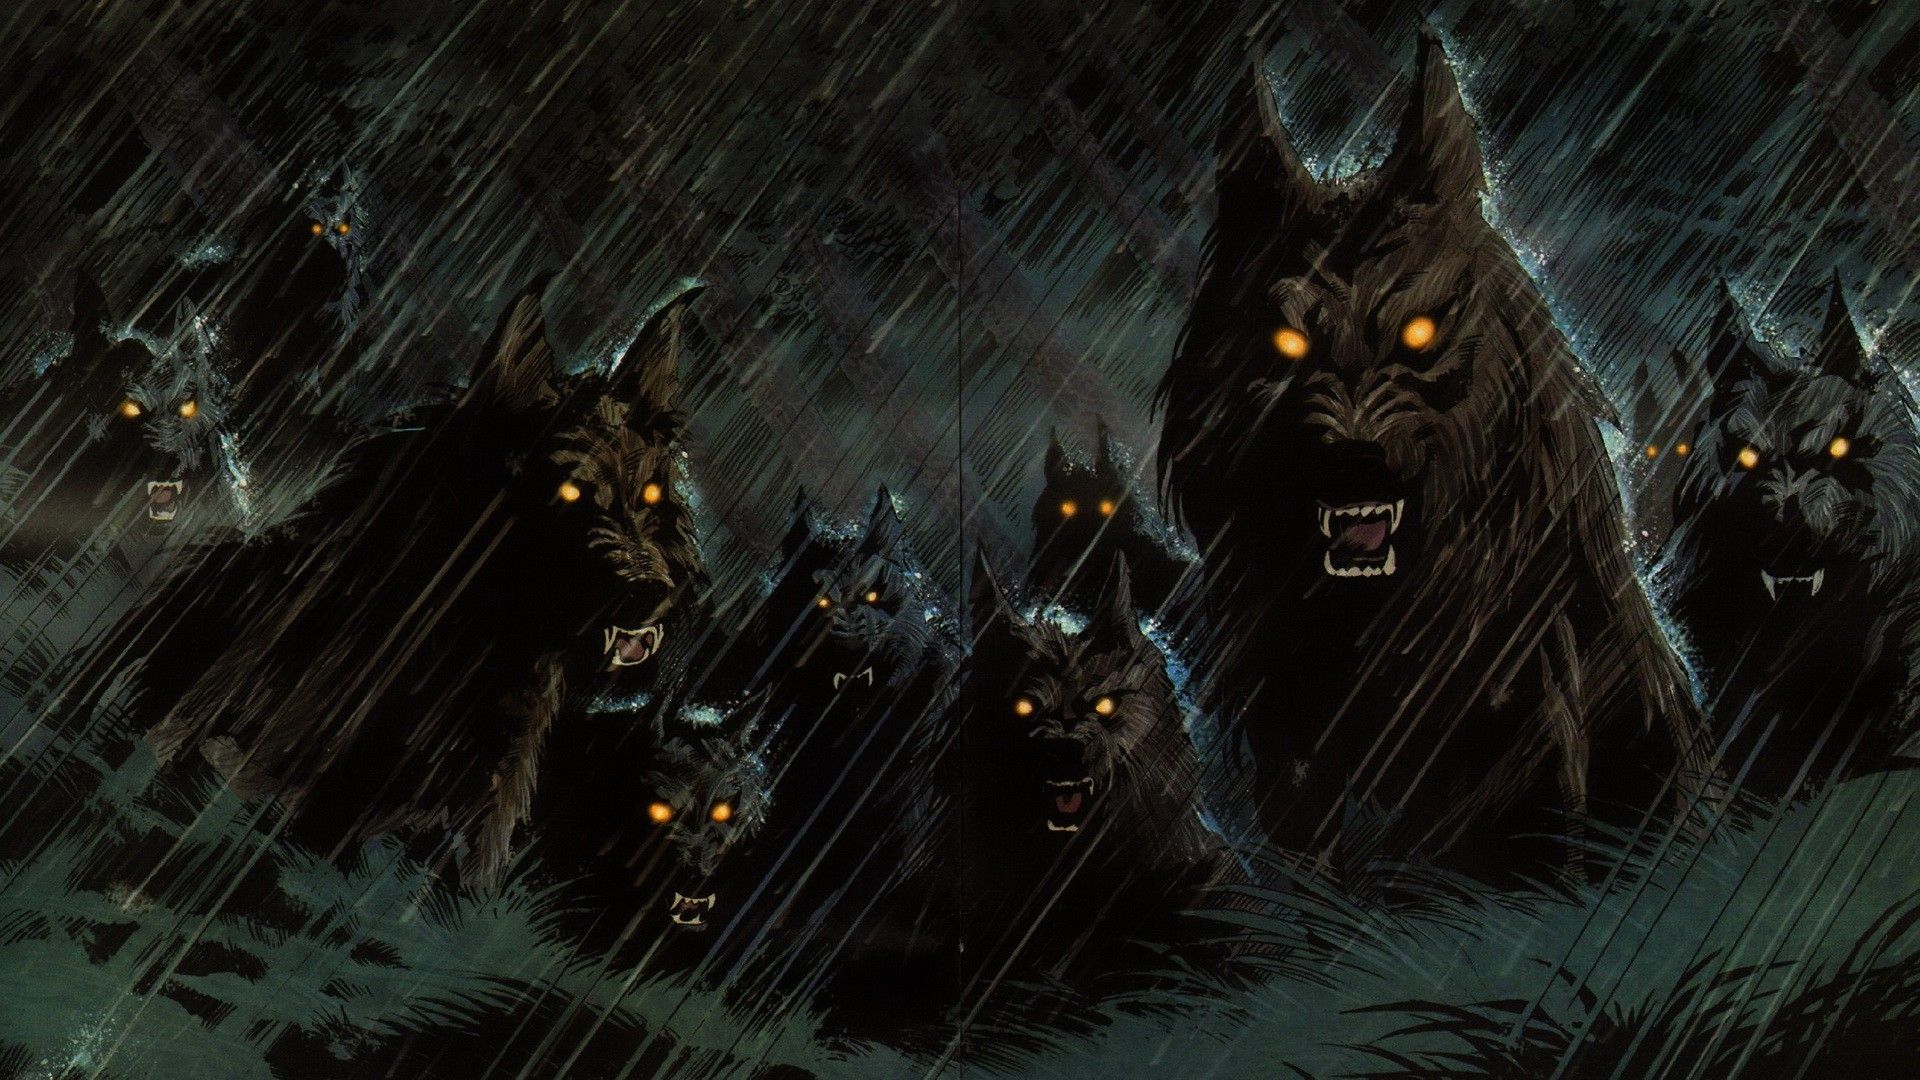 The draecu pack in pursuit of Nya & Ash. The unnatural hounds created by the enemy druid, Athairne. Season of the Wild. Scary wallpaper, Werewolf, Wolf wallpaper